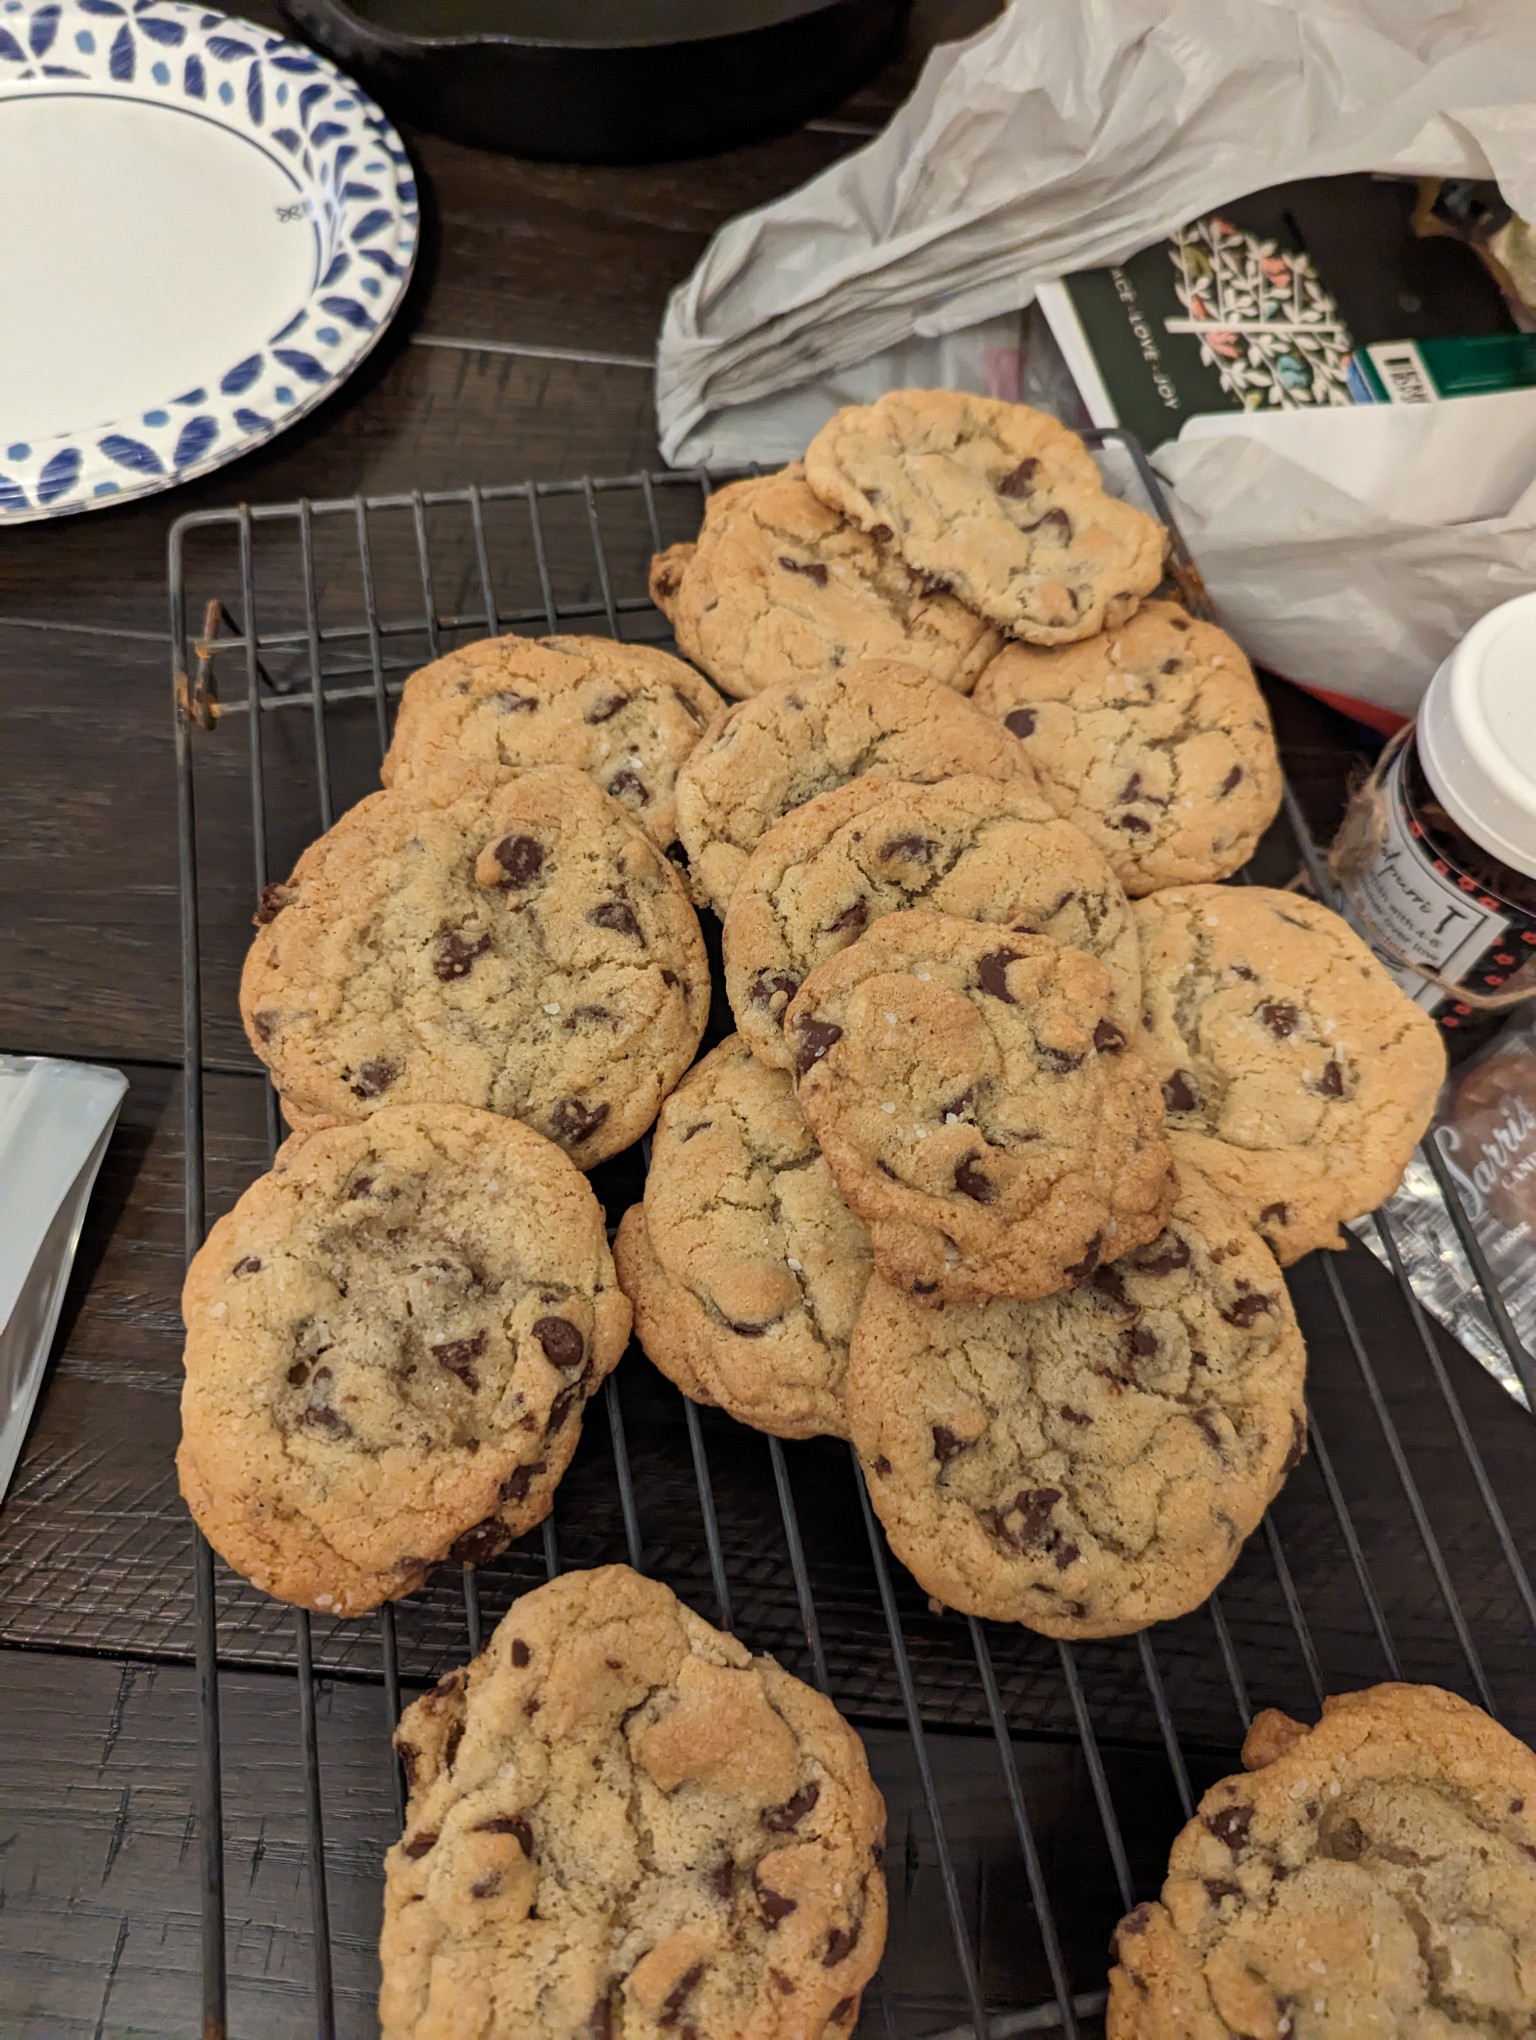 Crispy and Chewy Chocolate Chip Cookies